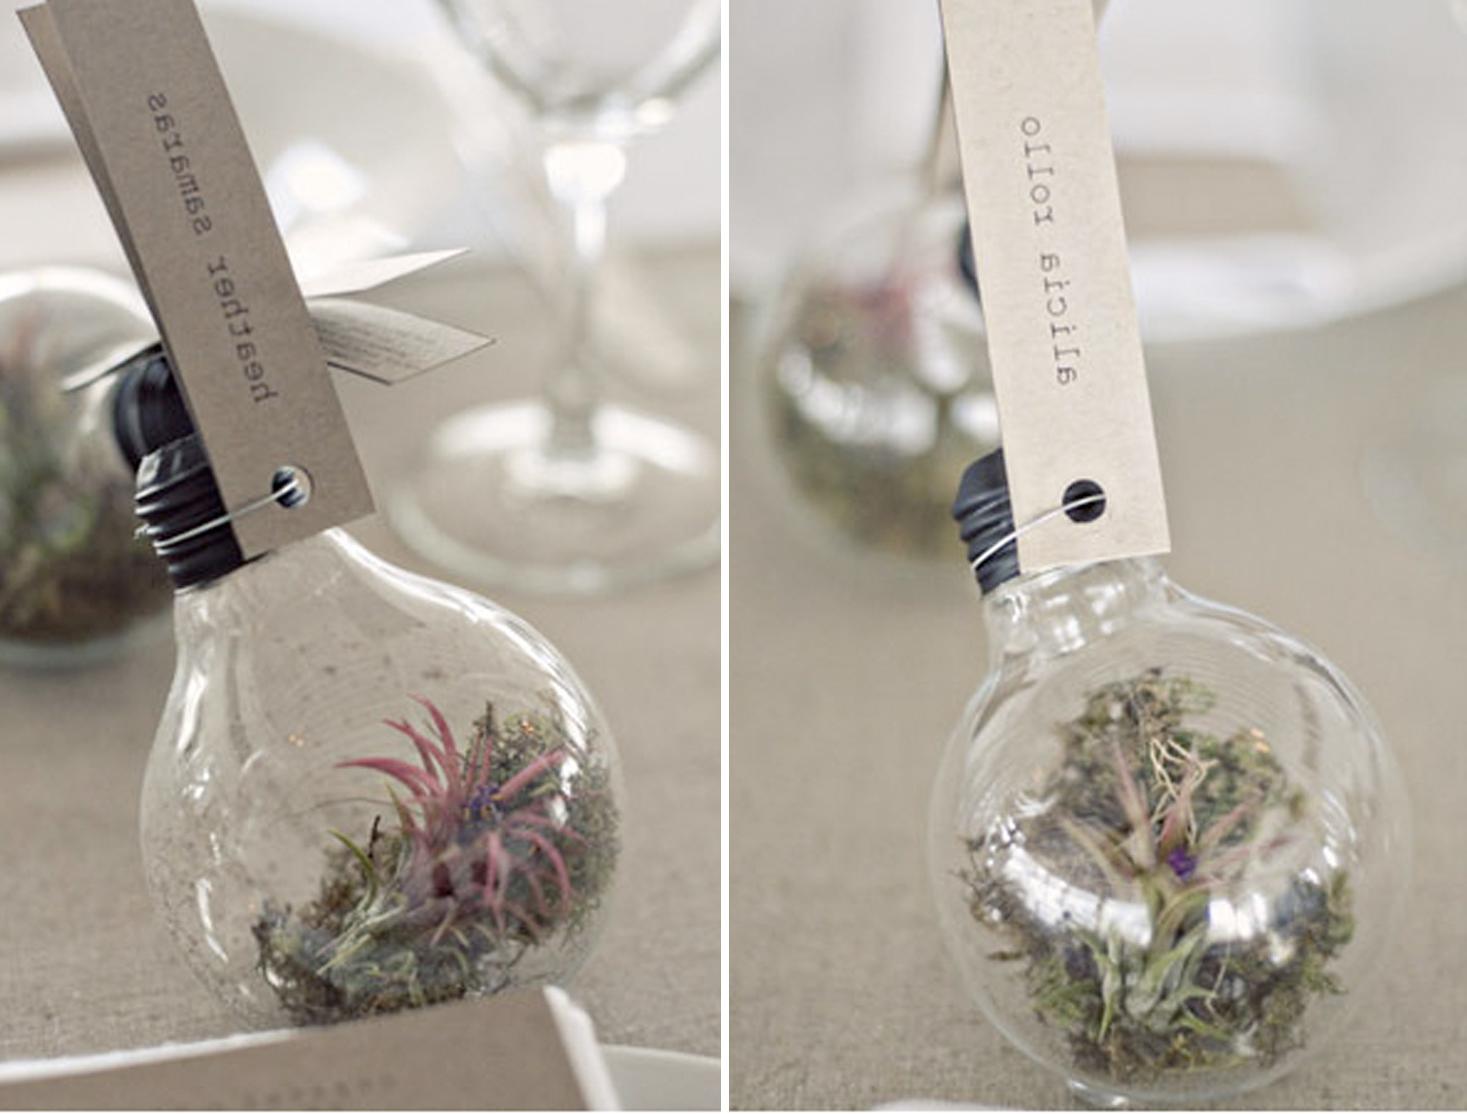 the favors as place cards.